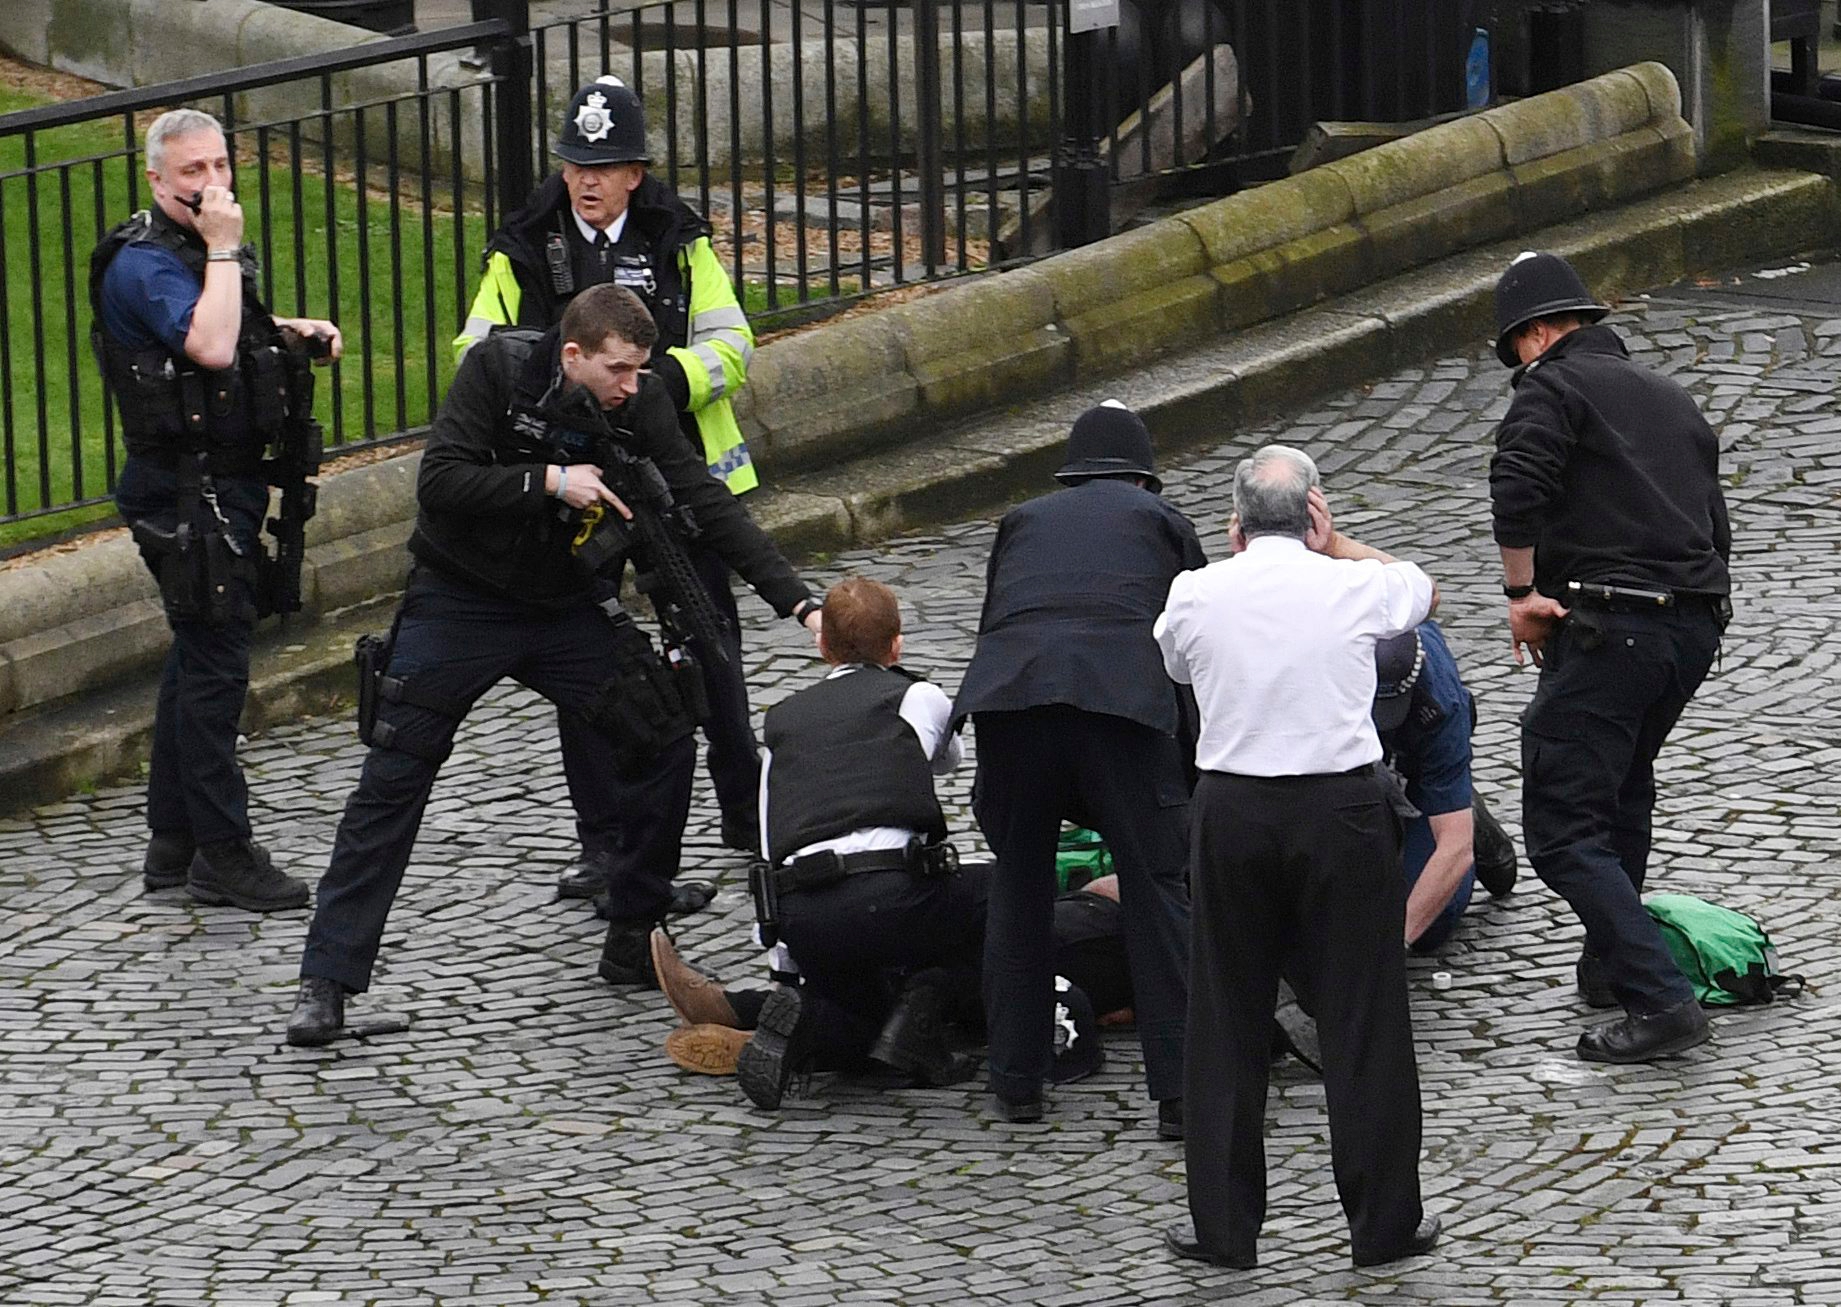 A policeman points a gun at a man on the floor as emergency services attend the scene outside the Palace of Westminster, London, Wednesday, March 22, 2017.  London police say they are treating a gun and knife incident at Britain's Parliament "as a terrorist incident until we know otherwise." The Metropolitan Police says in a statement that the incident is ongoing. It is urging people to stay away from the area. Officials say a man with a knife attacked a police officer at Parliament and was shot by officers. Nearby, witnesses say a vehicle struck several people on the Westminster Bridge.  (Stefan Rousseau/PA via AP). APTOPIX Britain Parliament Incident